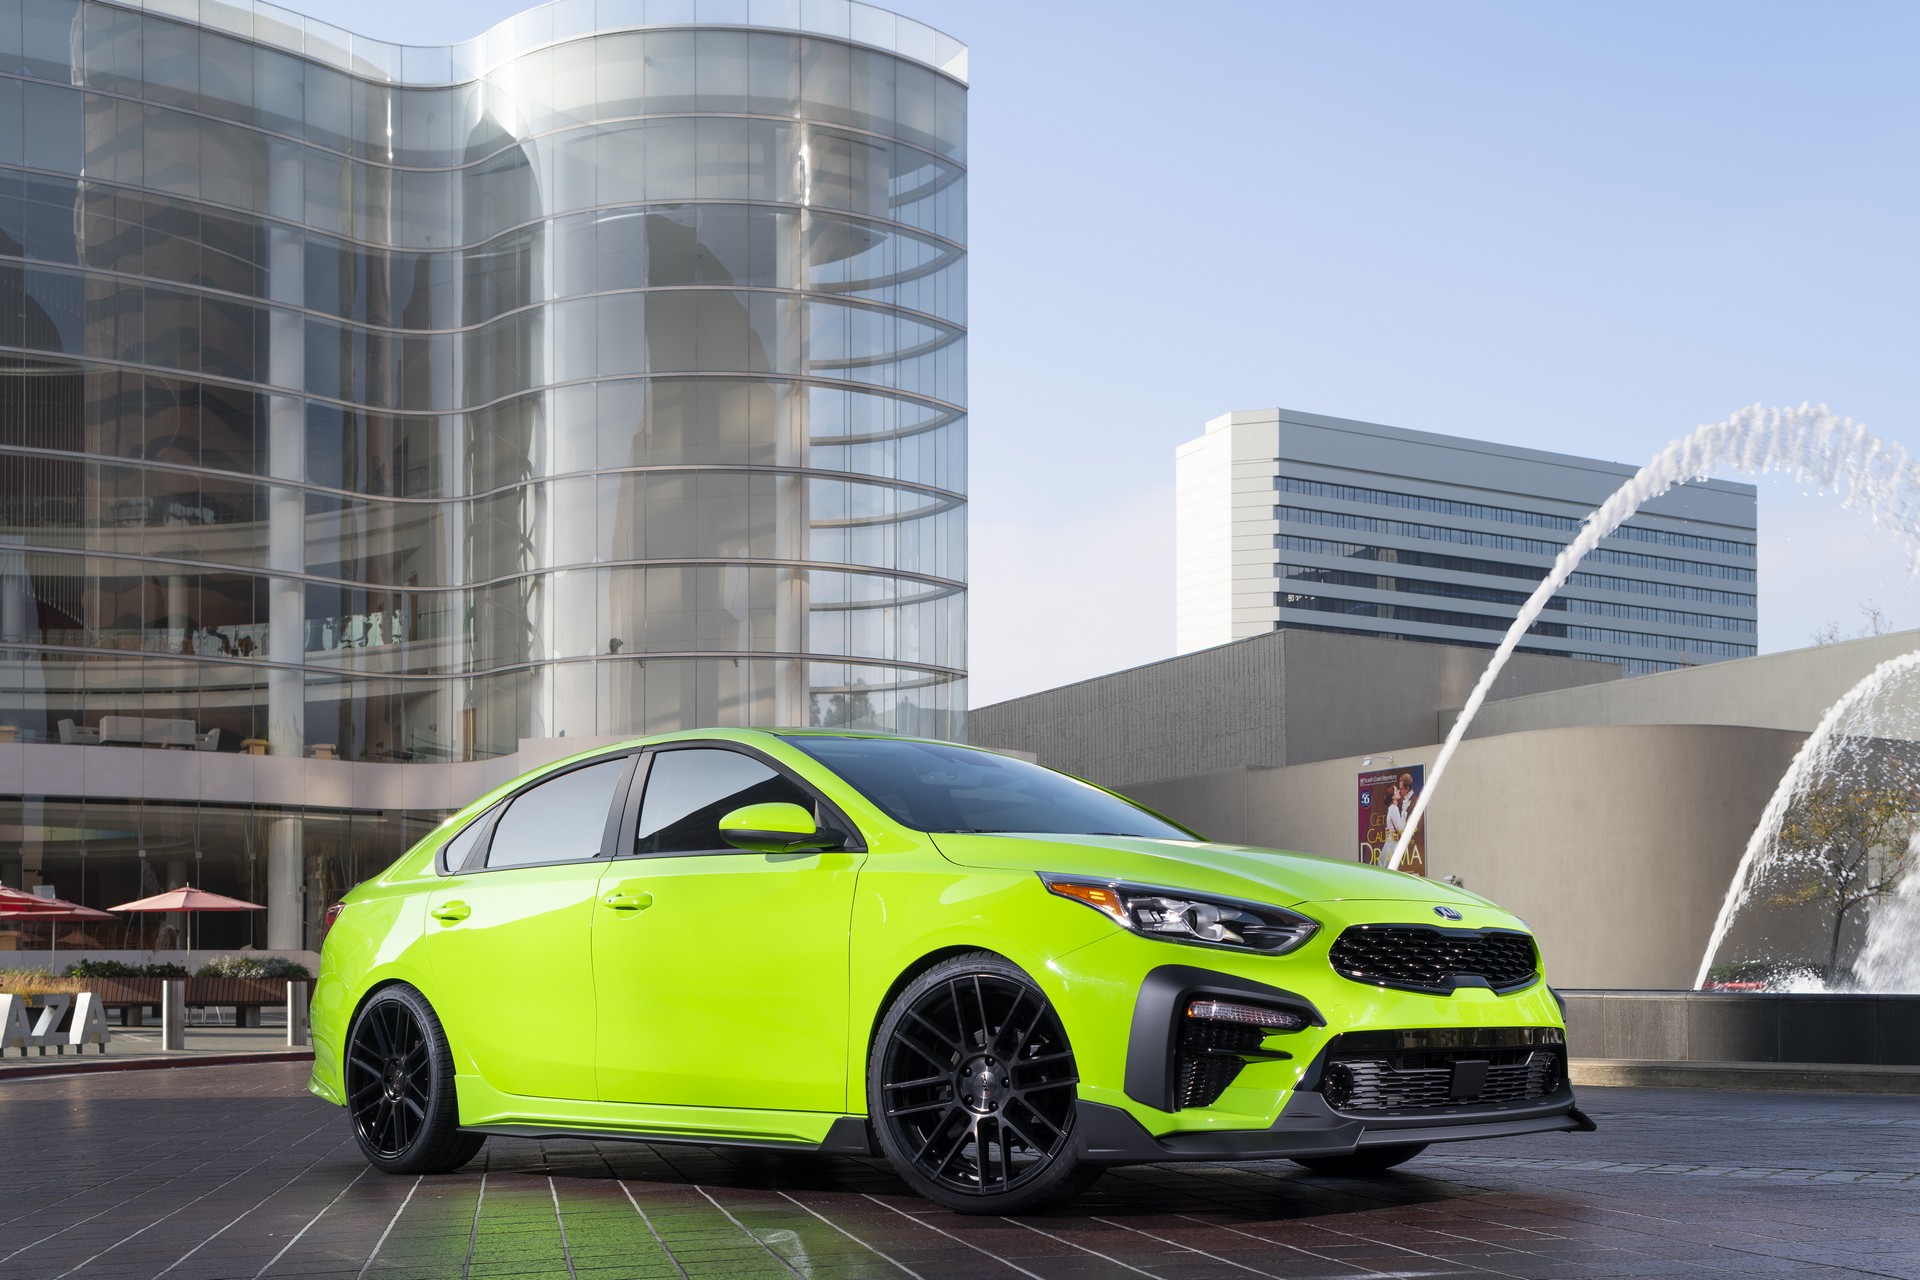 Kia DUBs Out At SEMA With K900 And Stinger GT Concepts | Carscoops